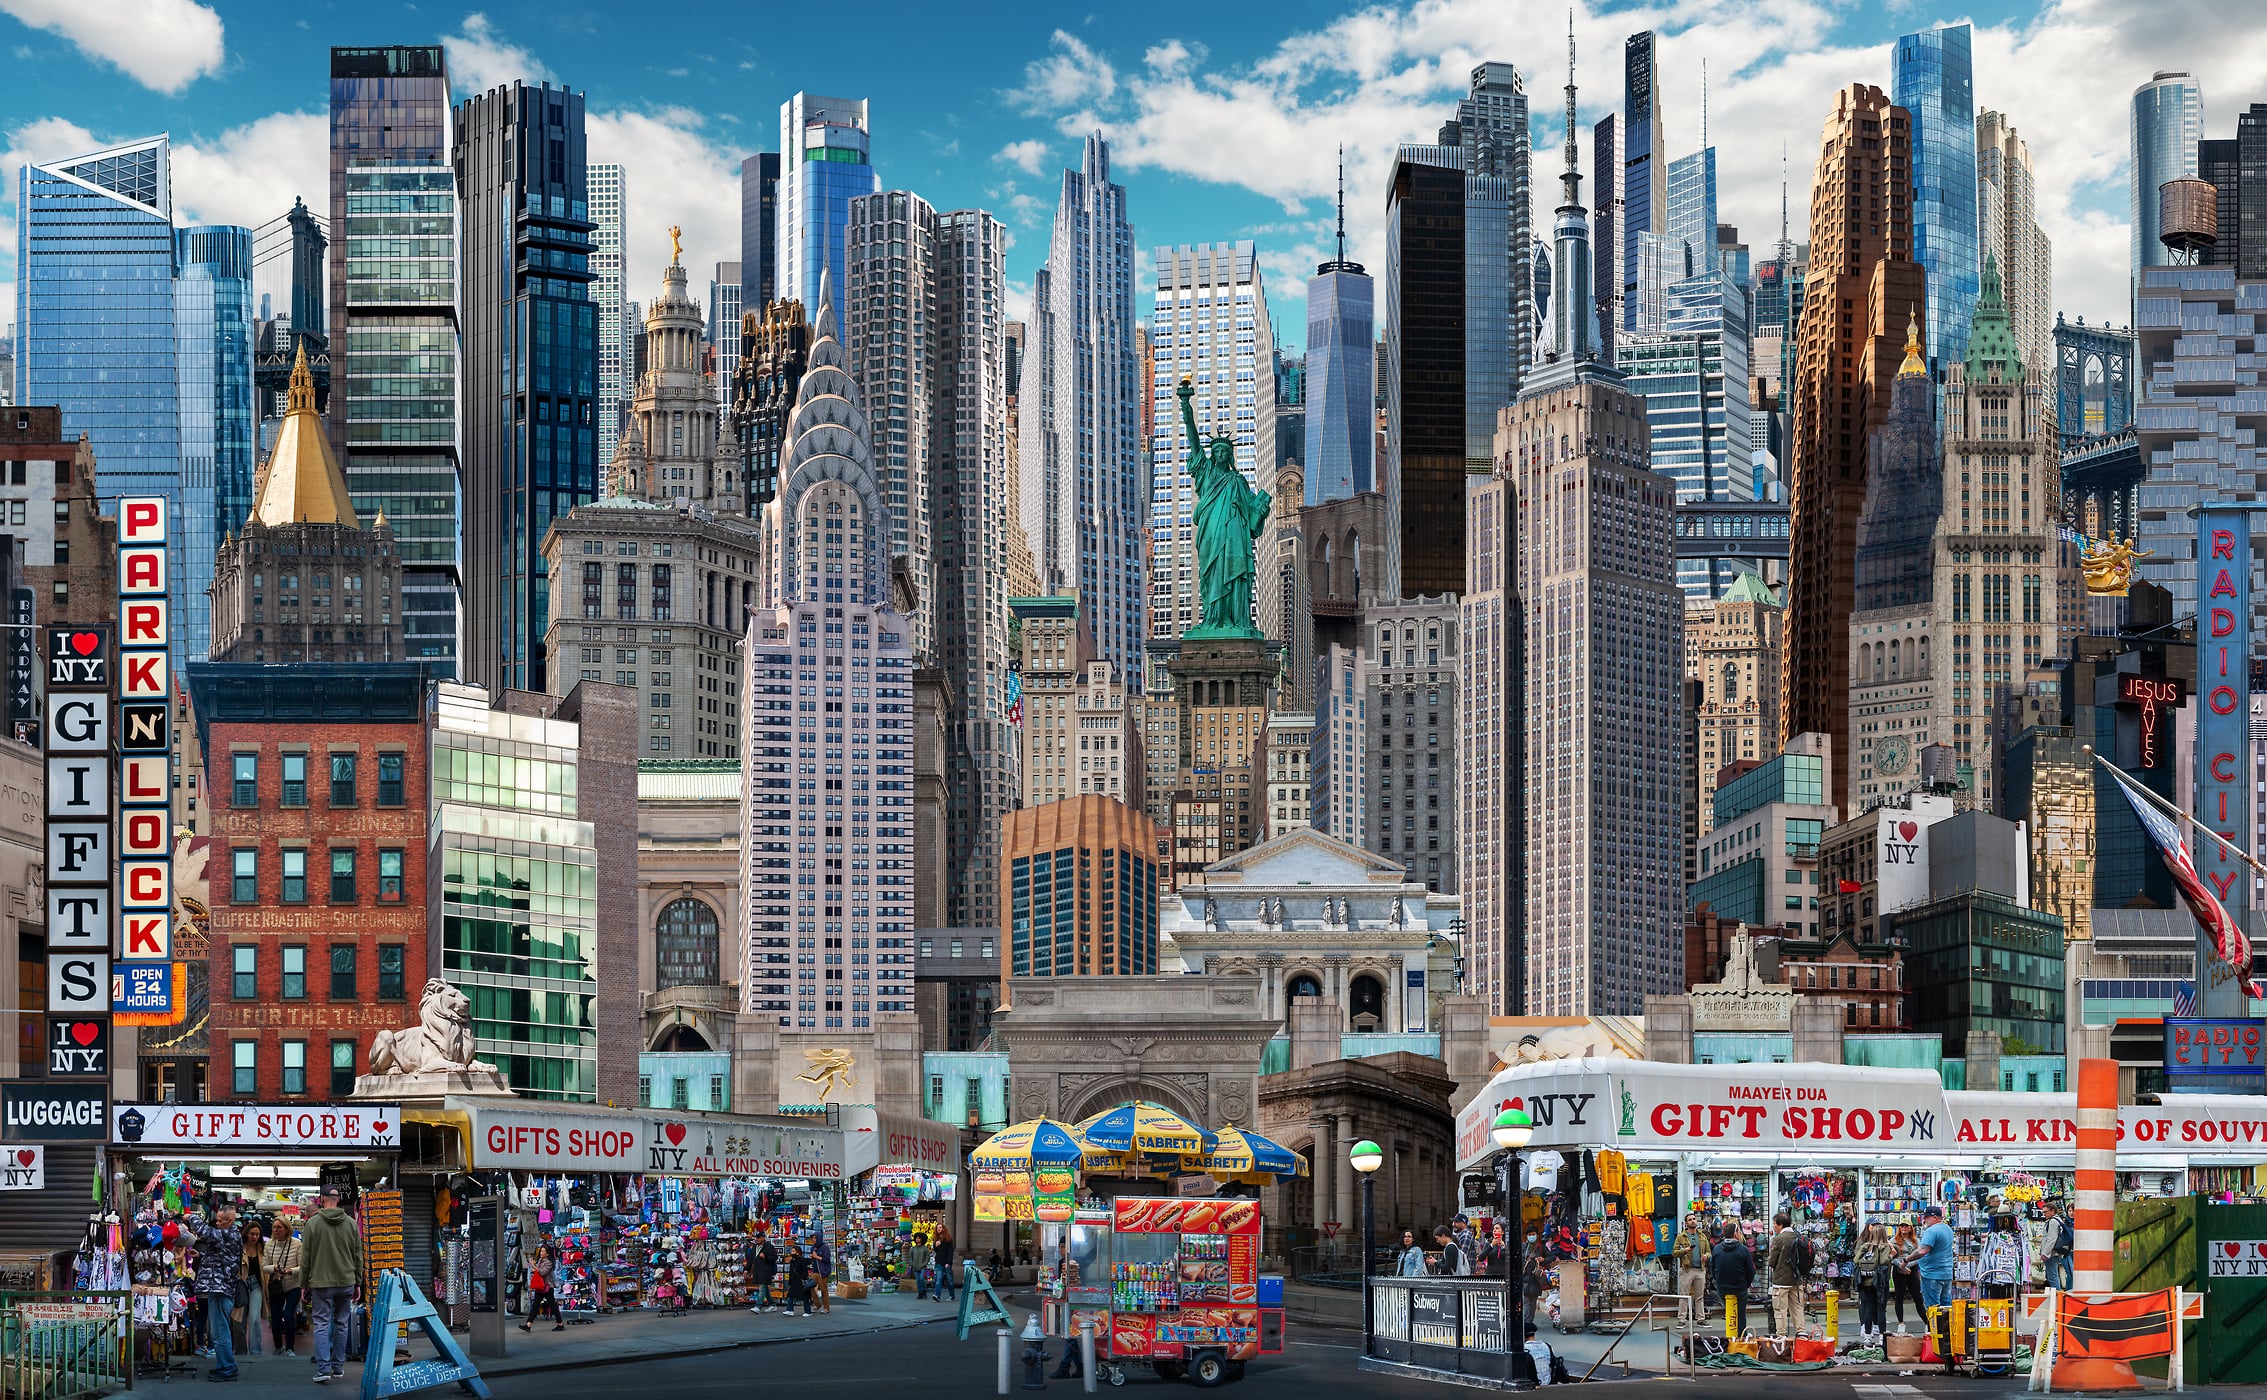 257 megapixels! A very high resolution, big wall art print of scenes from New York City; artistic collage photograph created by Andrew Soria.